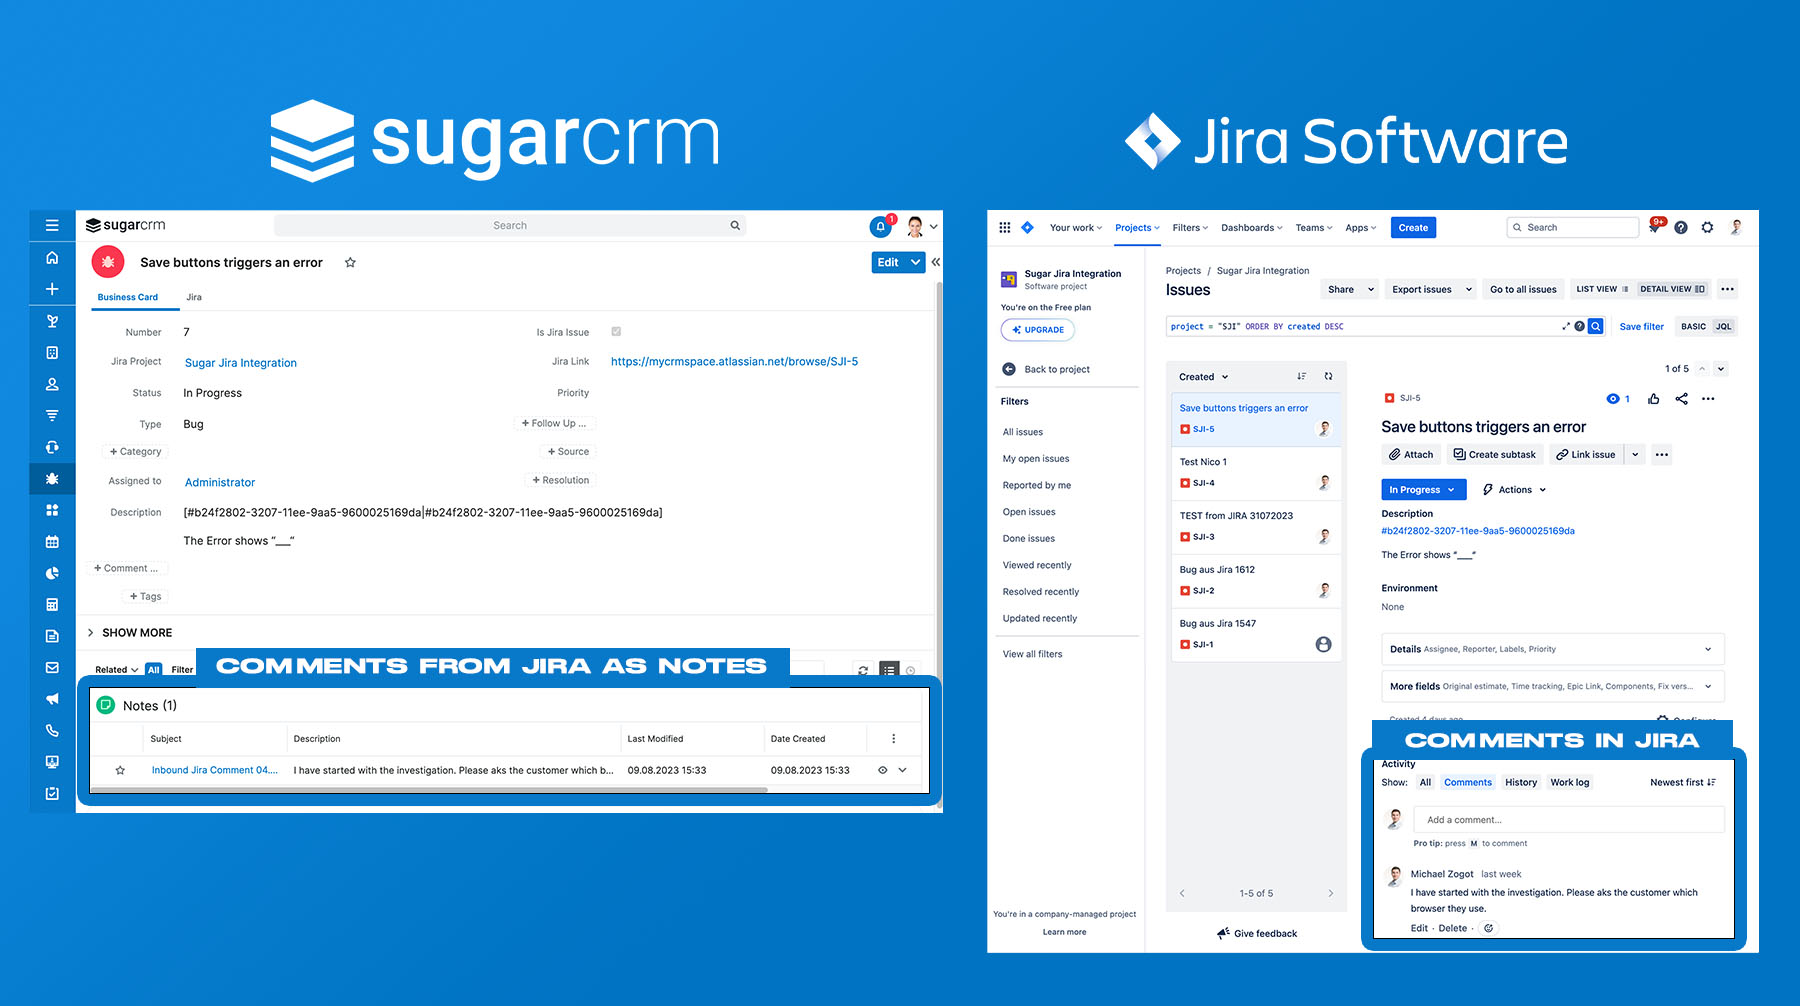 jira-to-sugarcrm-integration_full_comments.jpg